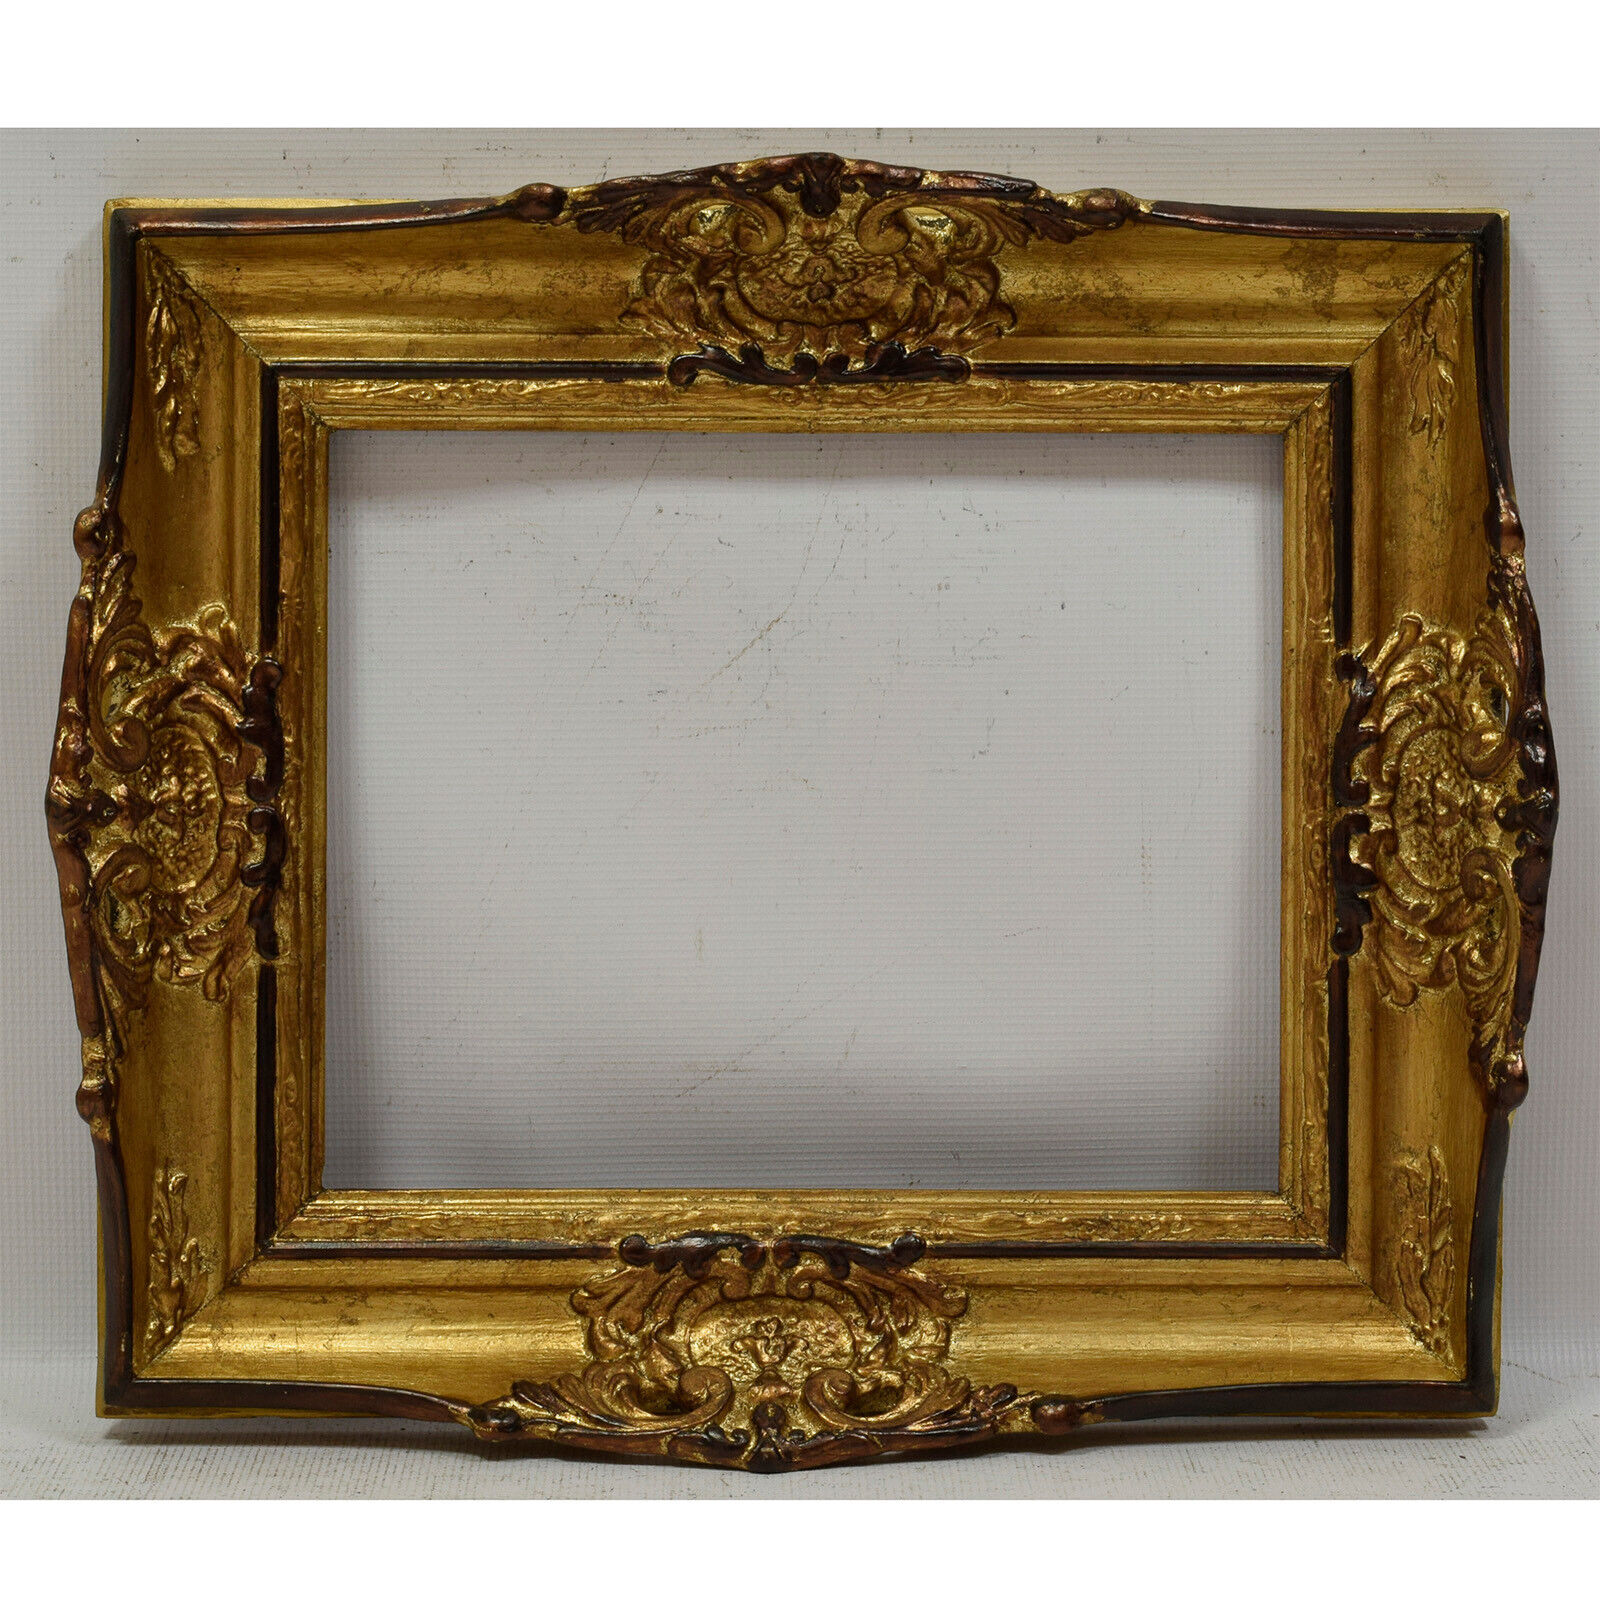 Ca. 1920-1930 Old wooden frame decorative with metal leaf Internal: 13,5x11 in